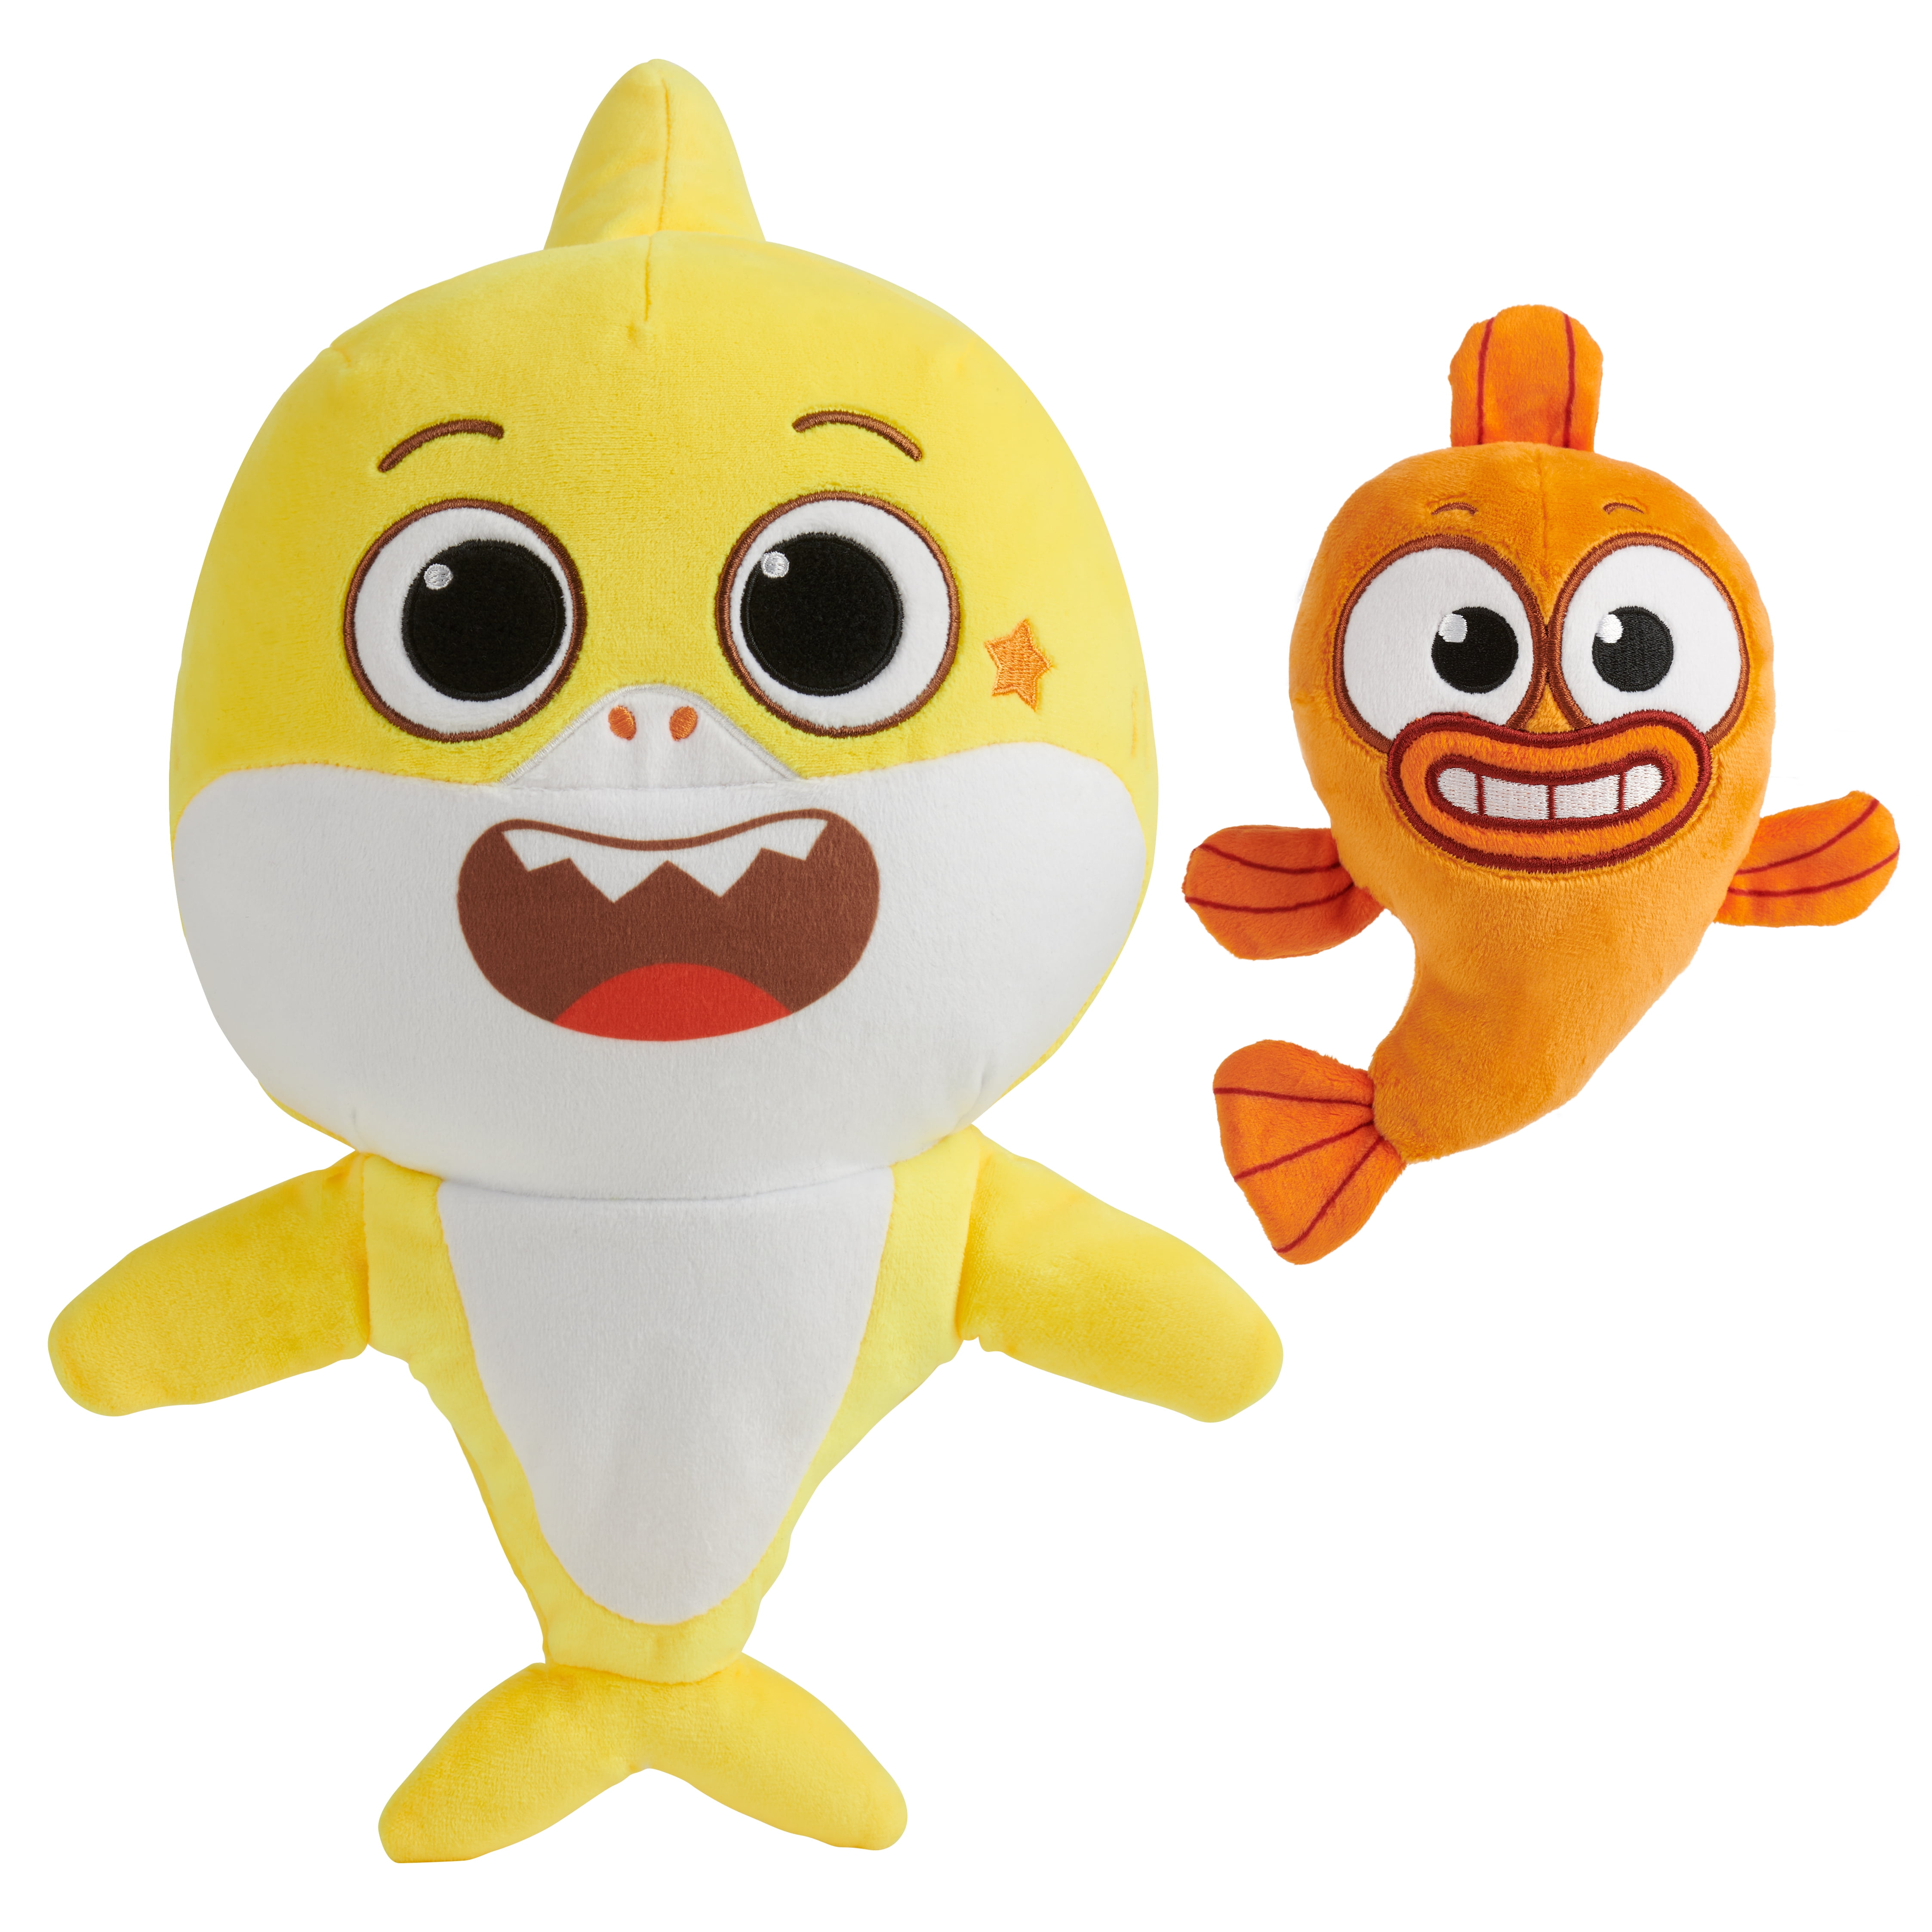 2019 Baby Shark Plush Singing Toys LED&Music Doll English Song Toy For Kids Gift 